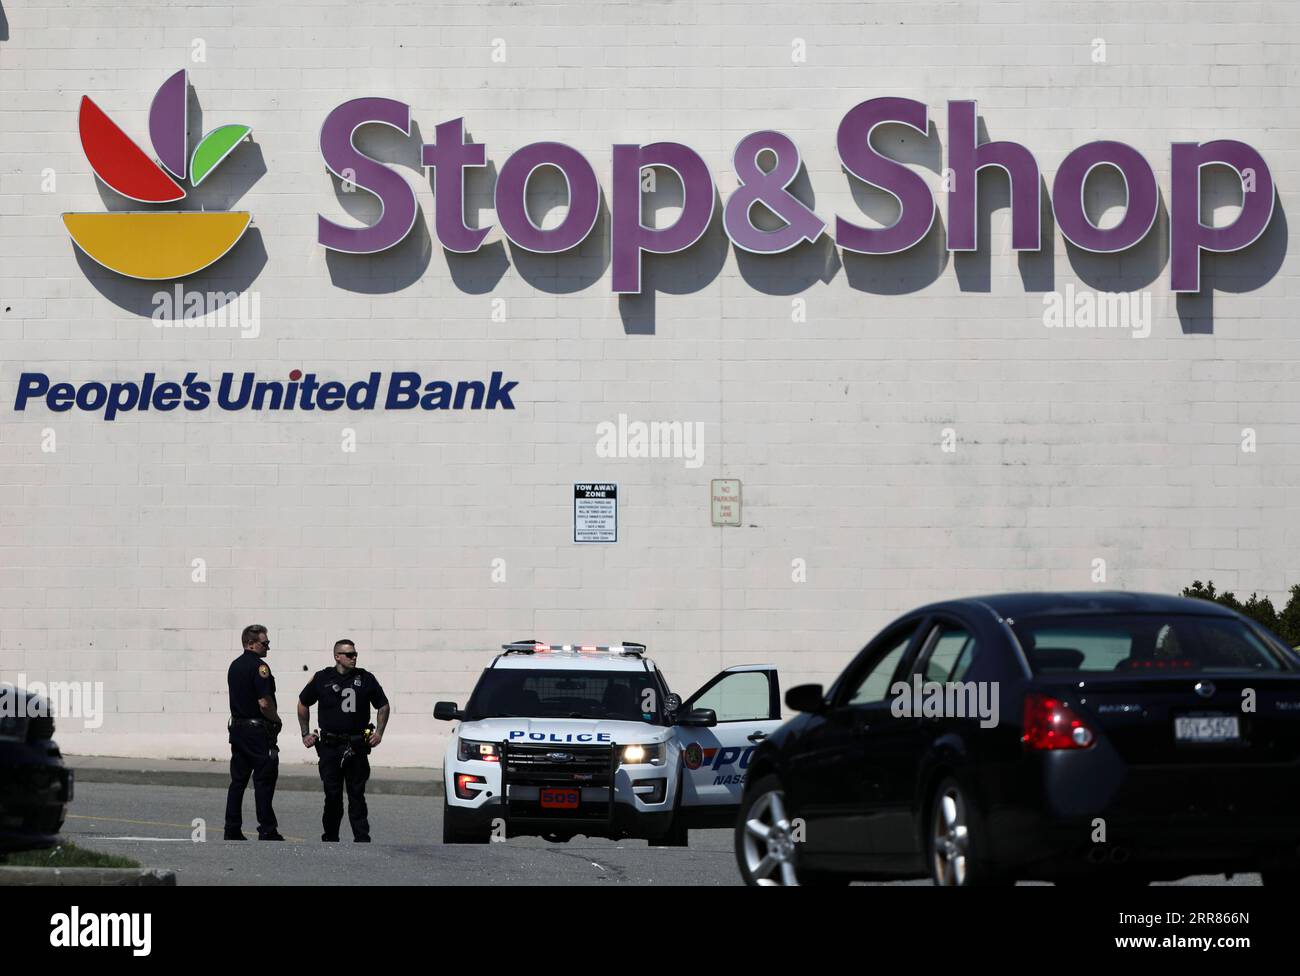 210420 -- NEW YORK, April 20, 2021 -- Policemen stand guard outside a Stop & Shop grocery store where a shooting took place in West Hempstead, New York, the United States, on April 20, 2021. A suspect in a shooting at the suburban New York grocery store on Tuesday was arrested after remaining at large for hours, local police said. The shooting, leaving one dead and two others injured, occurred late morning Tuesday at an office of the Stop & Shop grocery store in West Hempstead, according to police.  U.S.-NEW YORK-WEST HEMPSTEAD-SHOOTING WangxYing PUBLICATIONxNOTxINxCHN Stock Photo